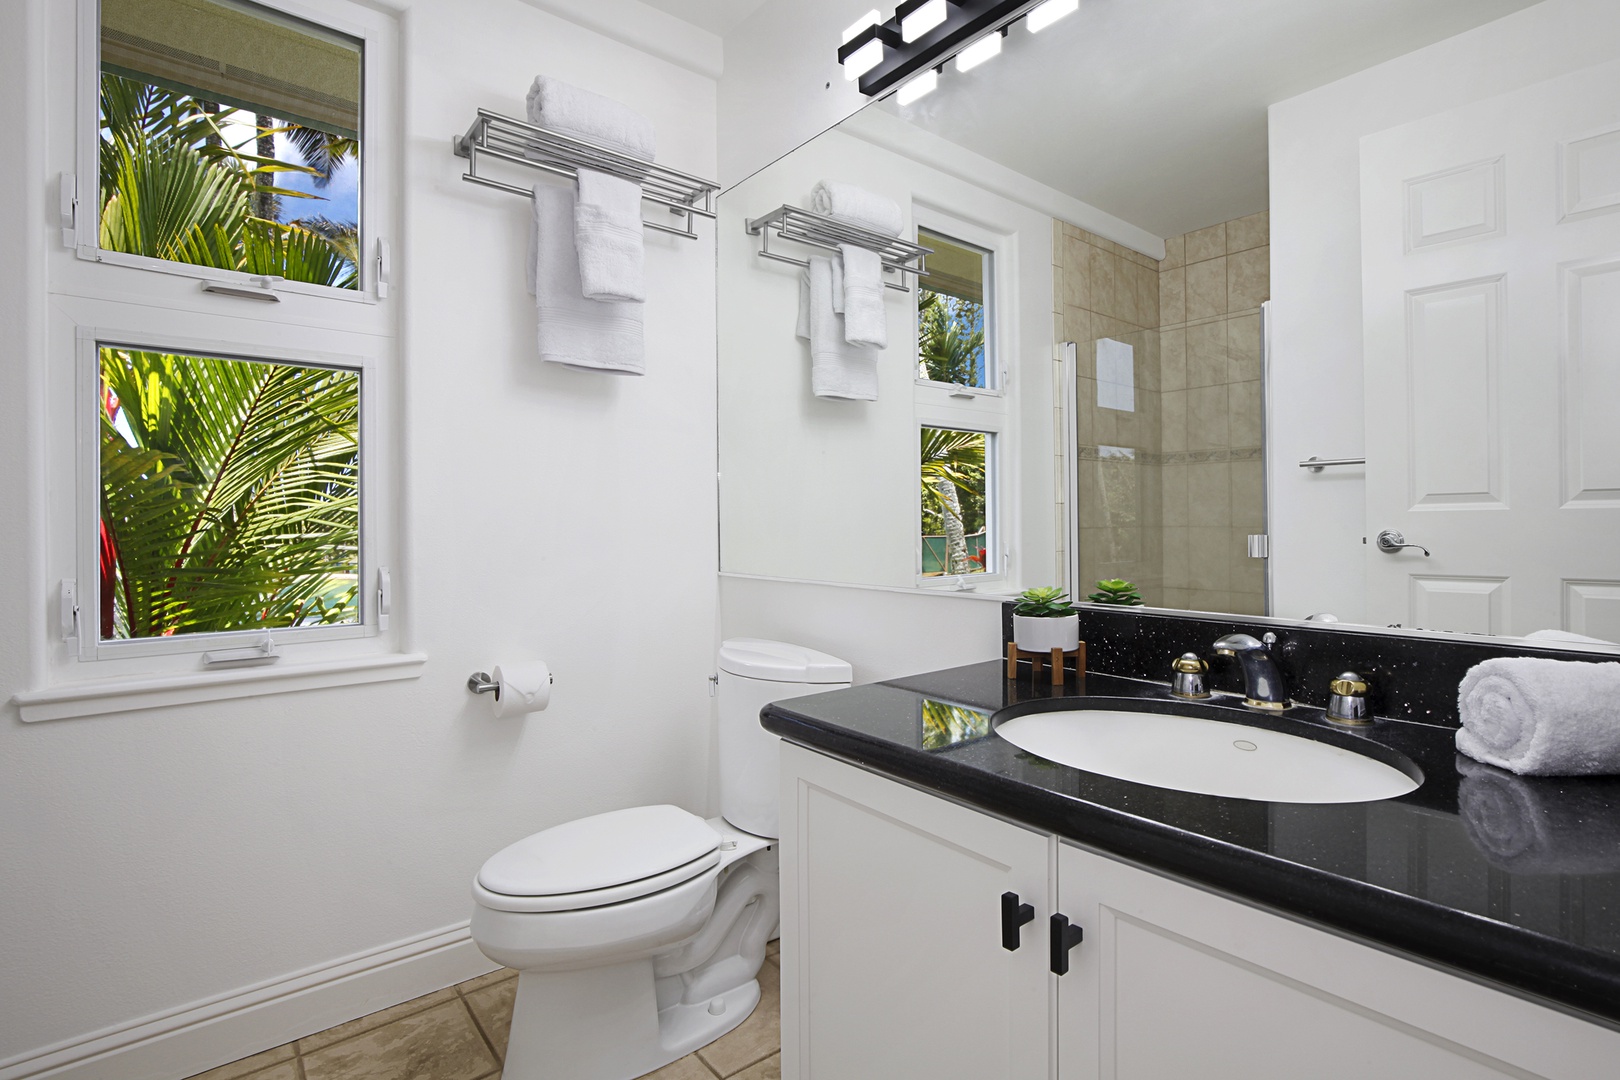 Princeville Vacation Rentals, Villas on the Prince #28 - Shared full bathroom with walk-in shower